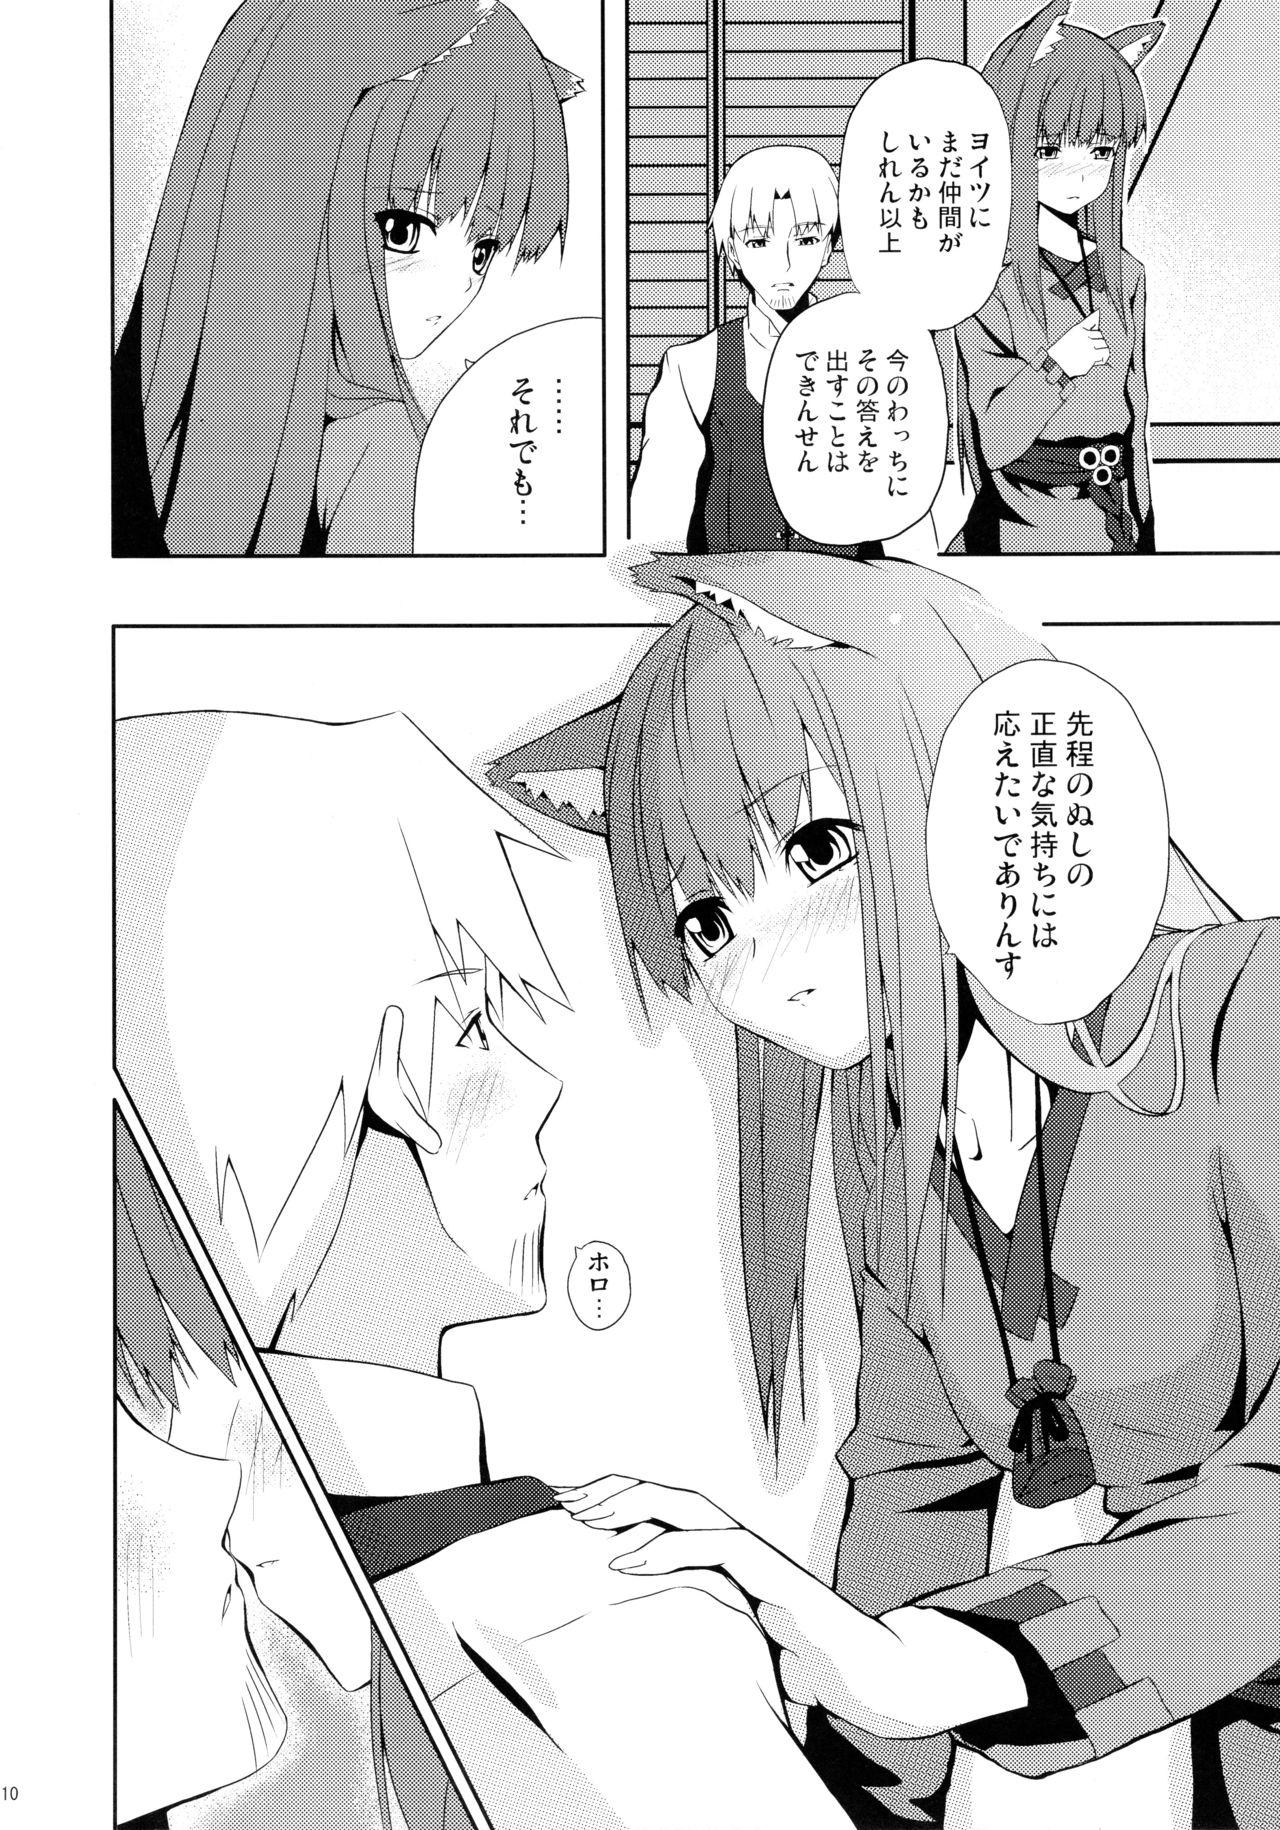 Nice Ass Bitter Apple - Spice and wolf Suckingdick - Page 10